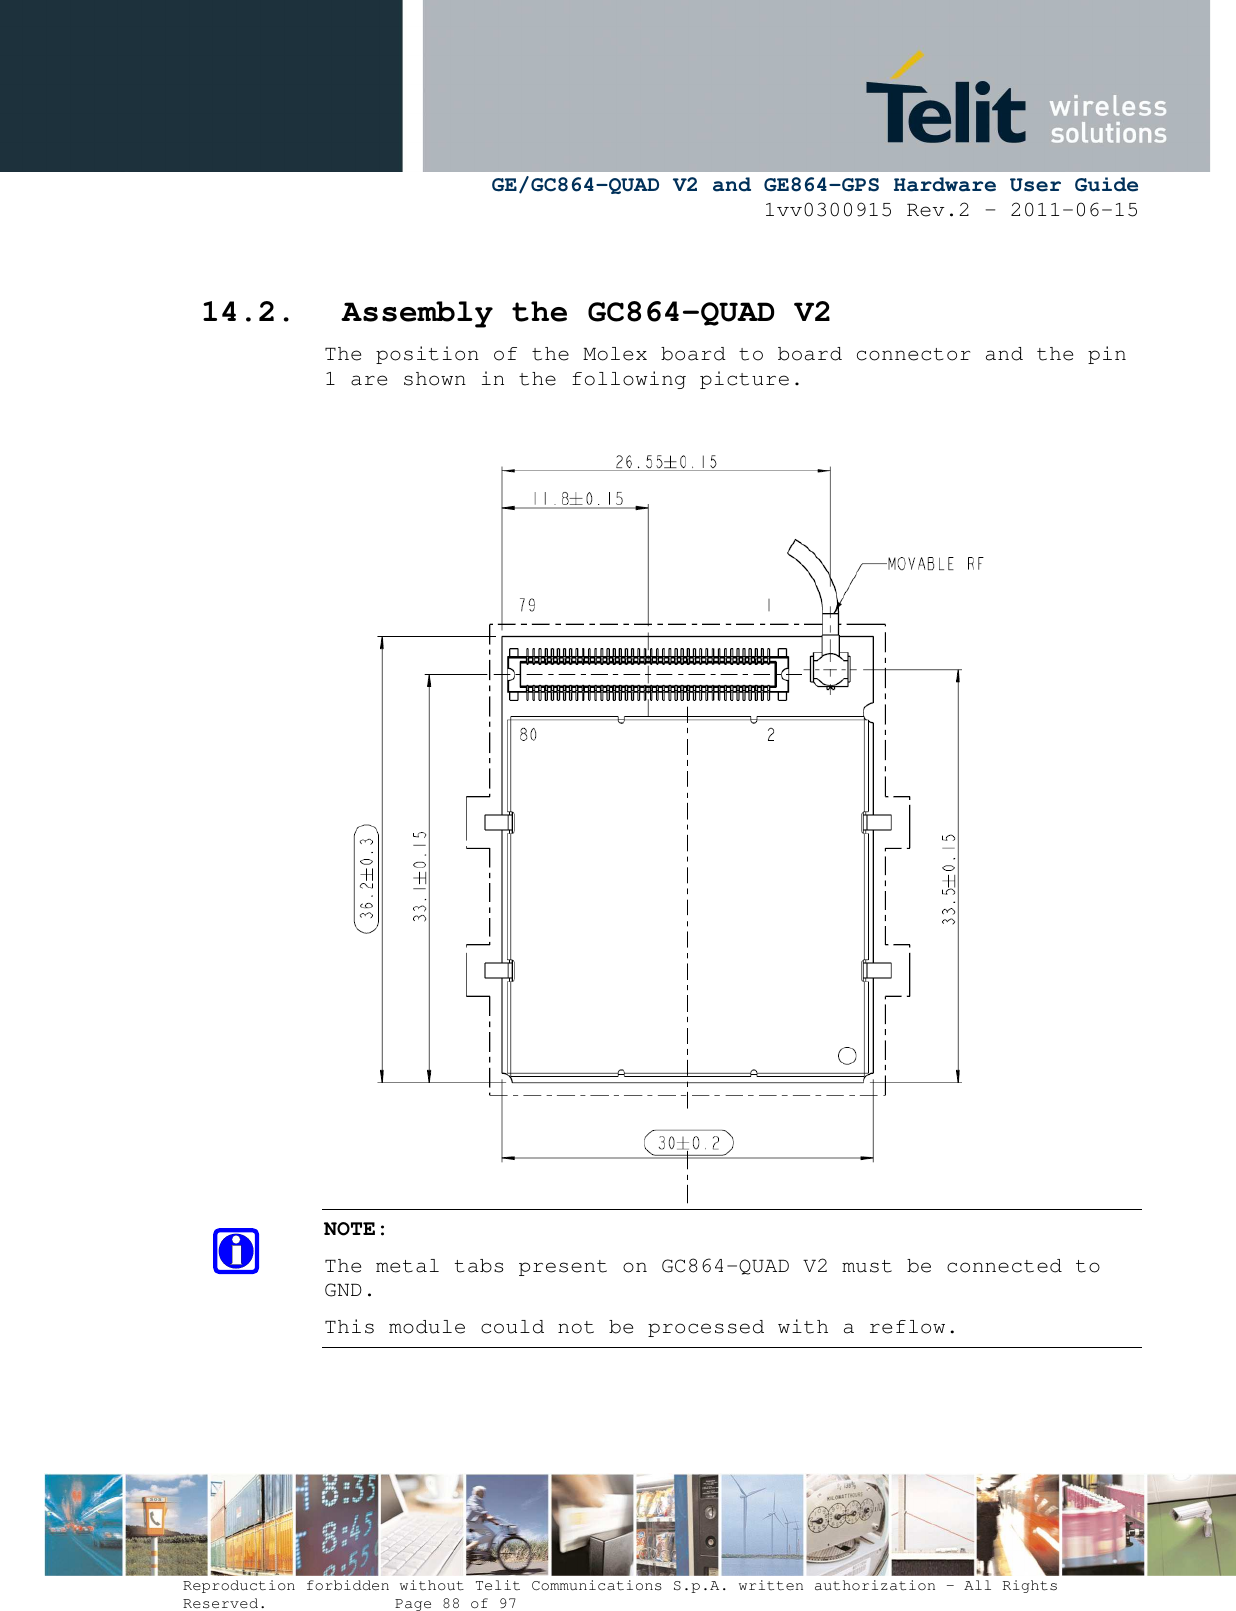      GE/GC864-QUAD V2 and GE864-GPS Hardware User Guide 1vv0300915 Rev.2 – 2011-06-15  Reproduction forbidden without Telit Communications S.p.A. written authorization - All Rights Reserved.    Page 88 of 97   14.2. Assembly the GC864-QUAD V2 The position of the Molex board to board connector and the pin 1 are shown in the following picture.  NOTE: The metal tabs present on GC864-QUAD V2 must be connected to GND. This module could not be processed with a reflow.   